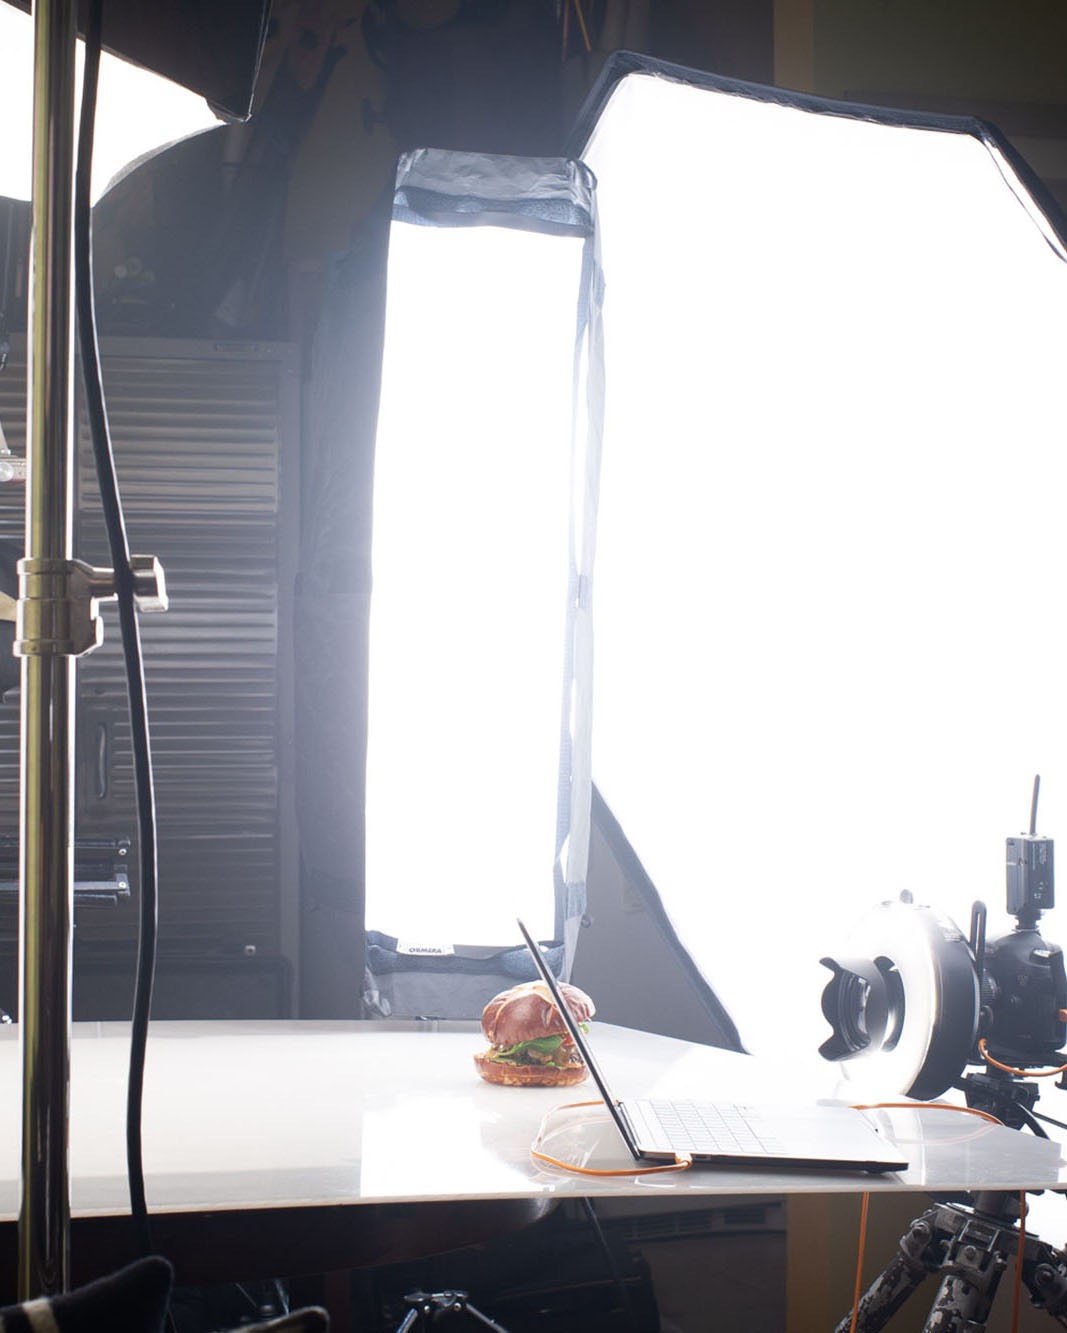 Behind the scenes of a burger being photographed in a photo studio